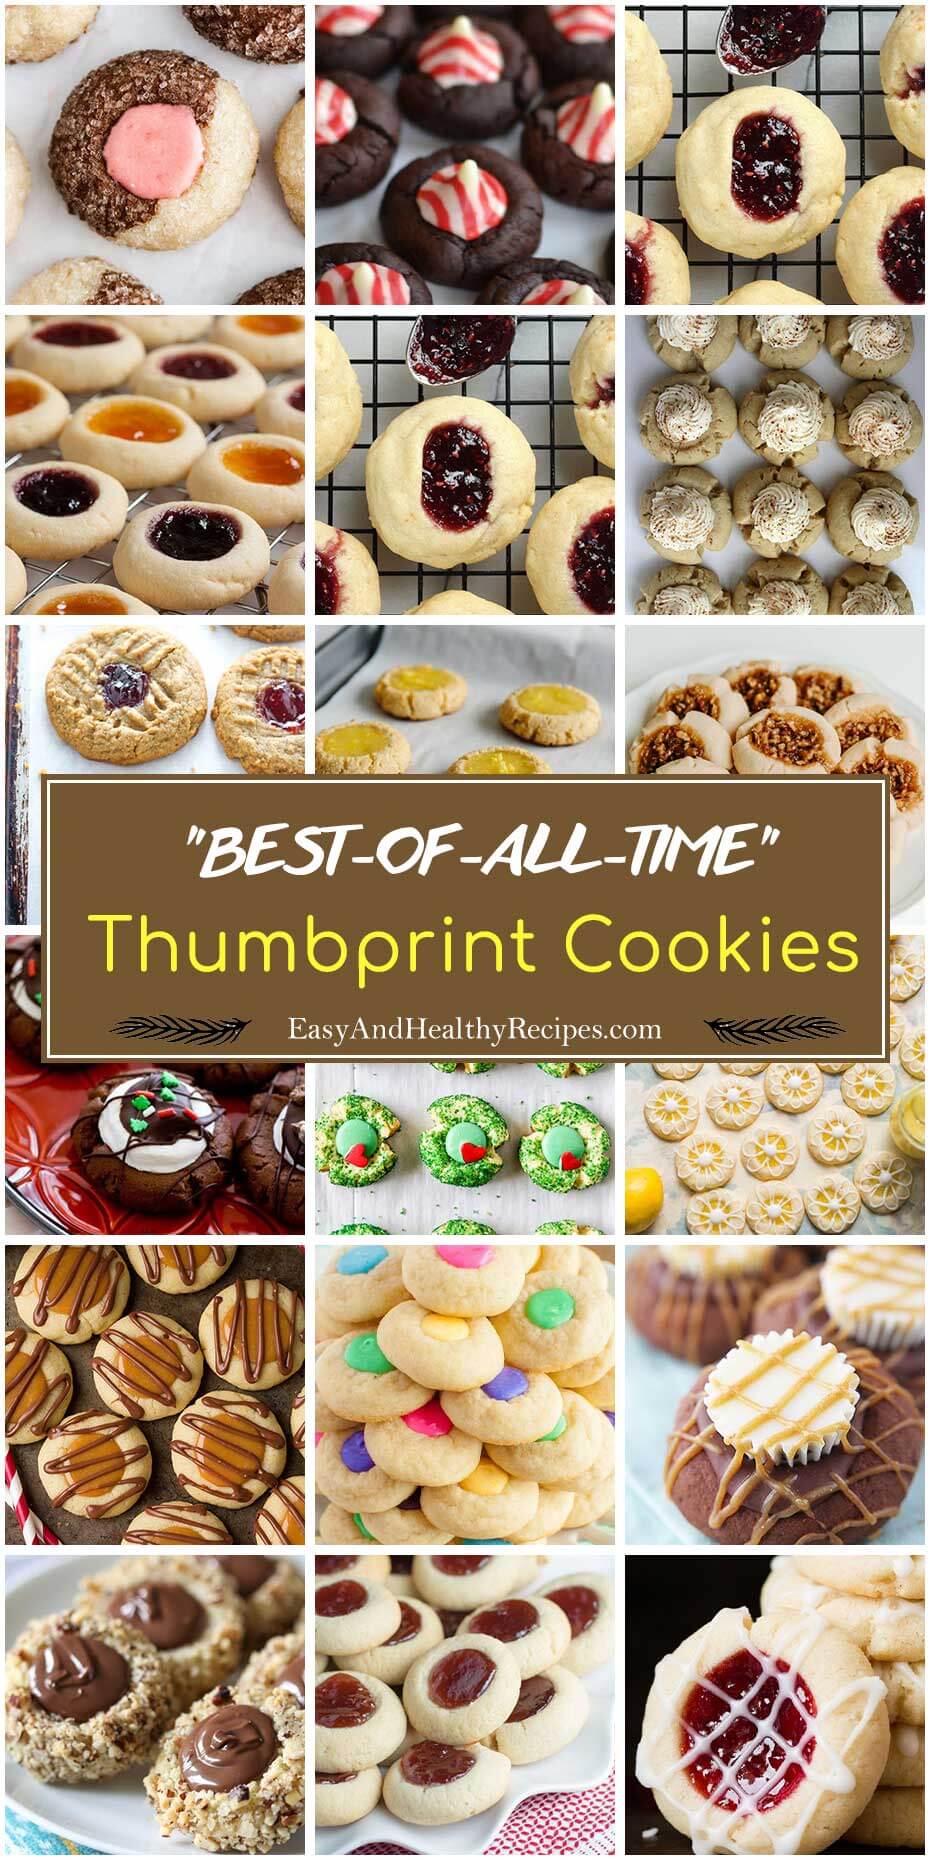 30 “Best-Of-All-Time” Thumbprint Cookies